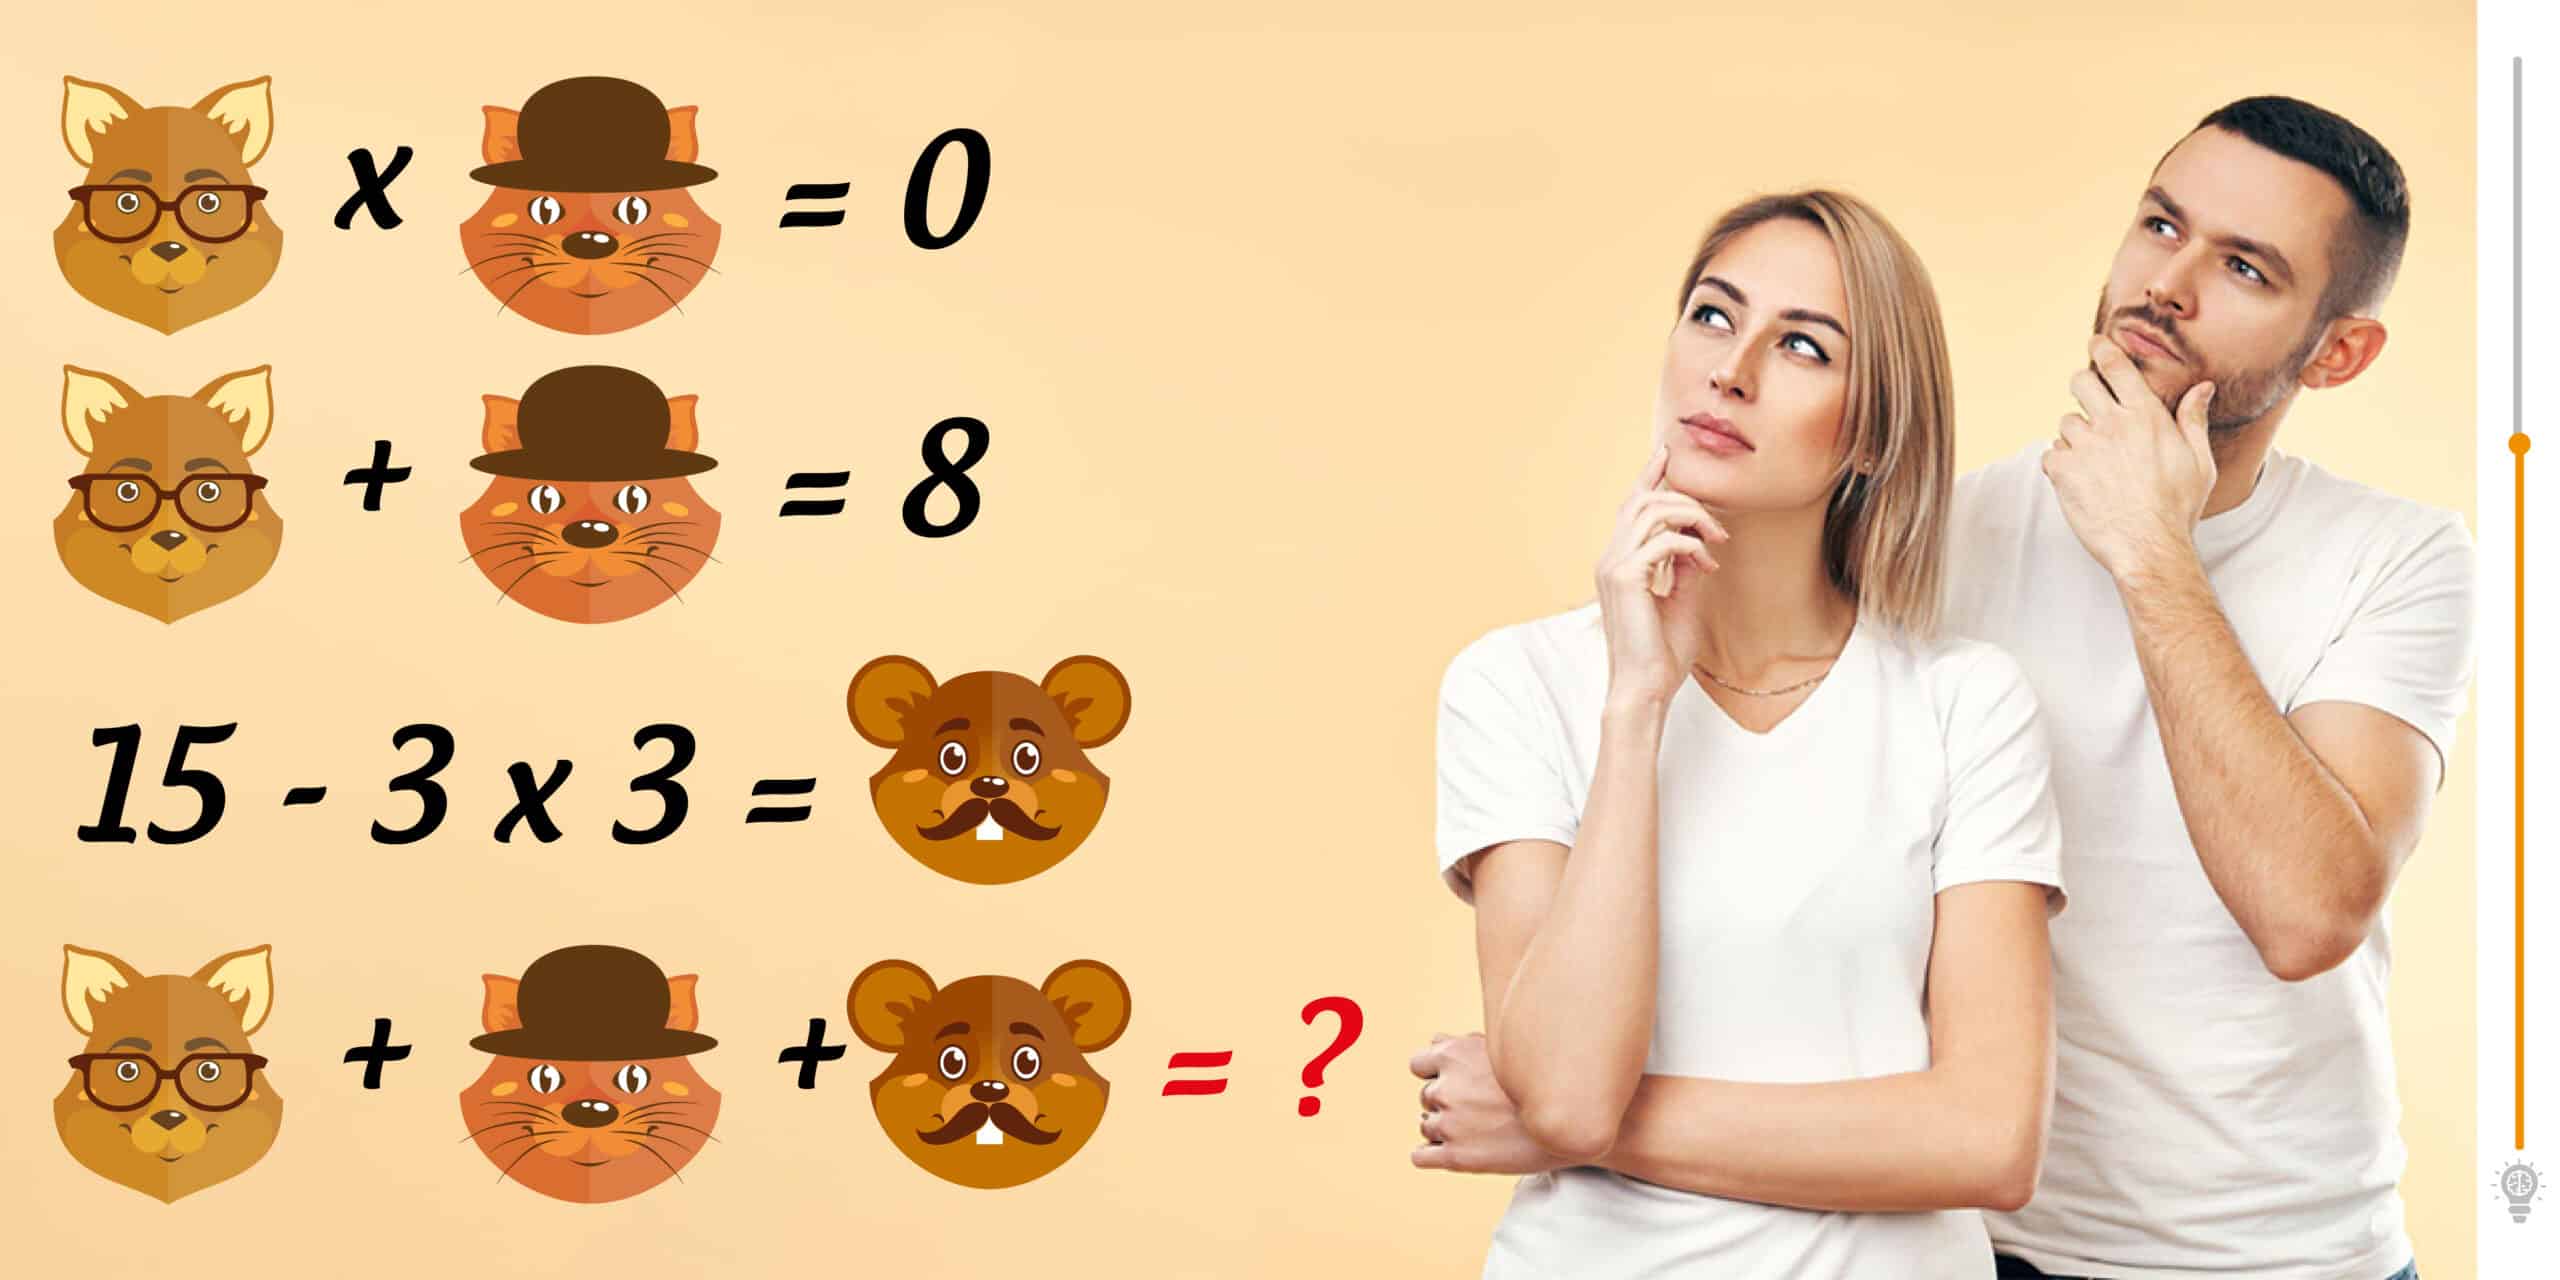 Math Riddle: Try to solve this math challenge in less than 20 seconds.